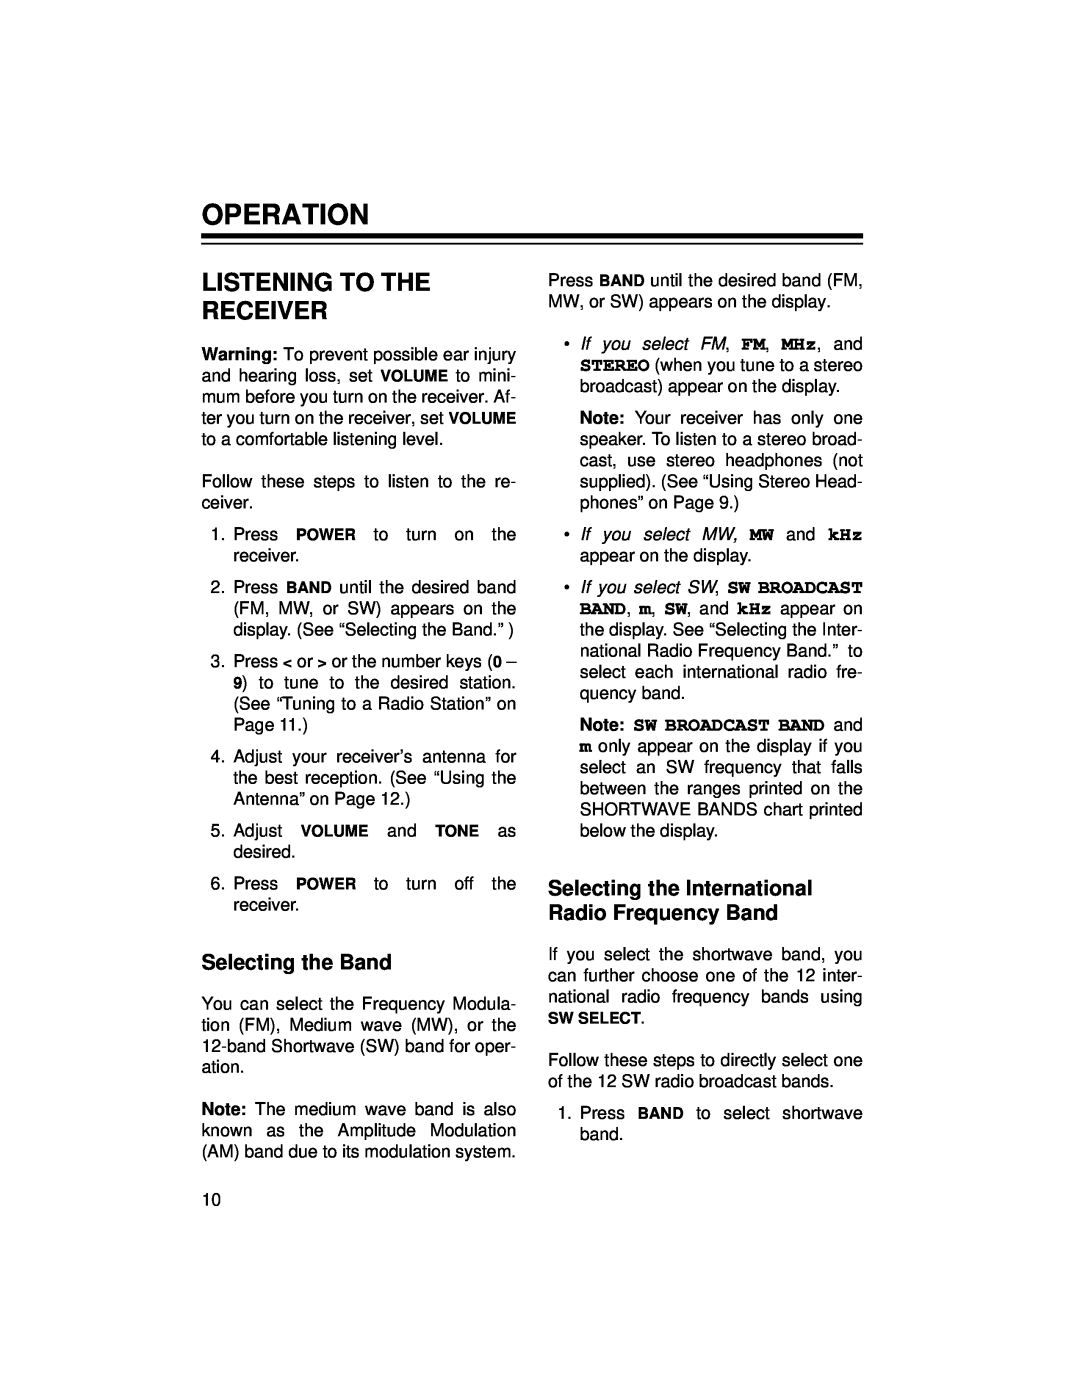 Radio Shack DX-396 owner manual Operation, Listening To The Receiver, Selecting the Band 